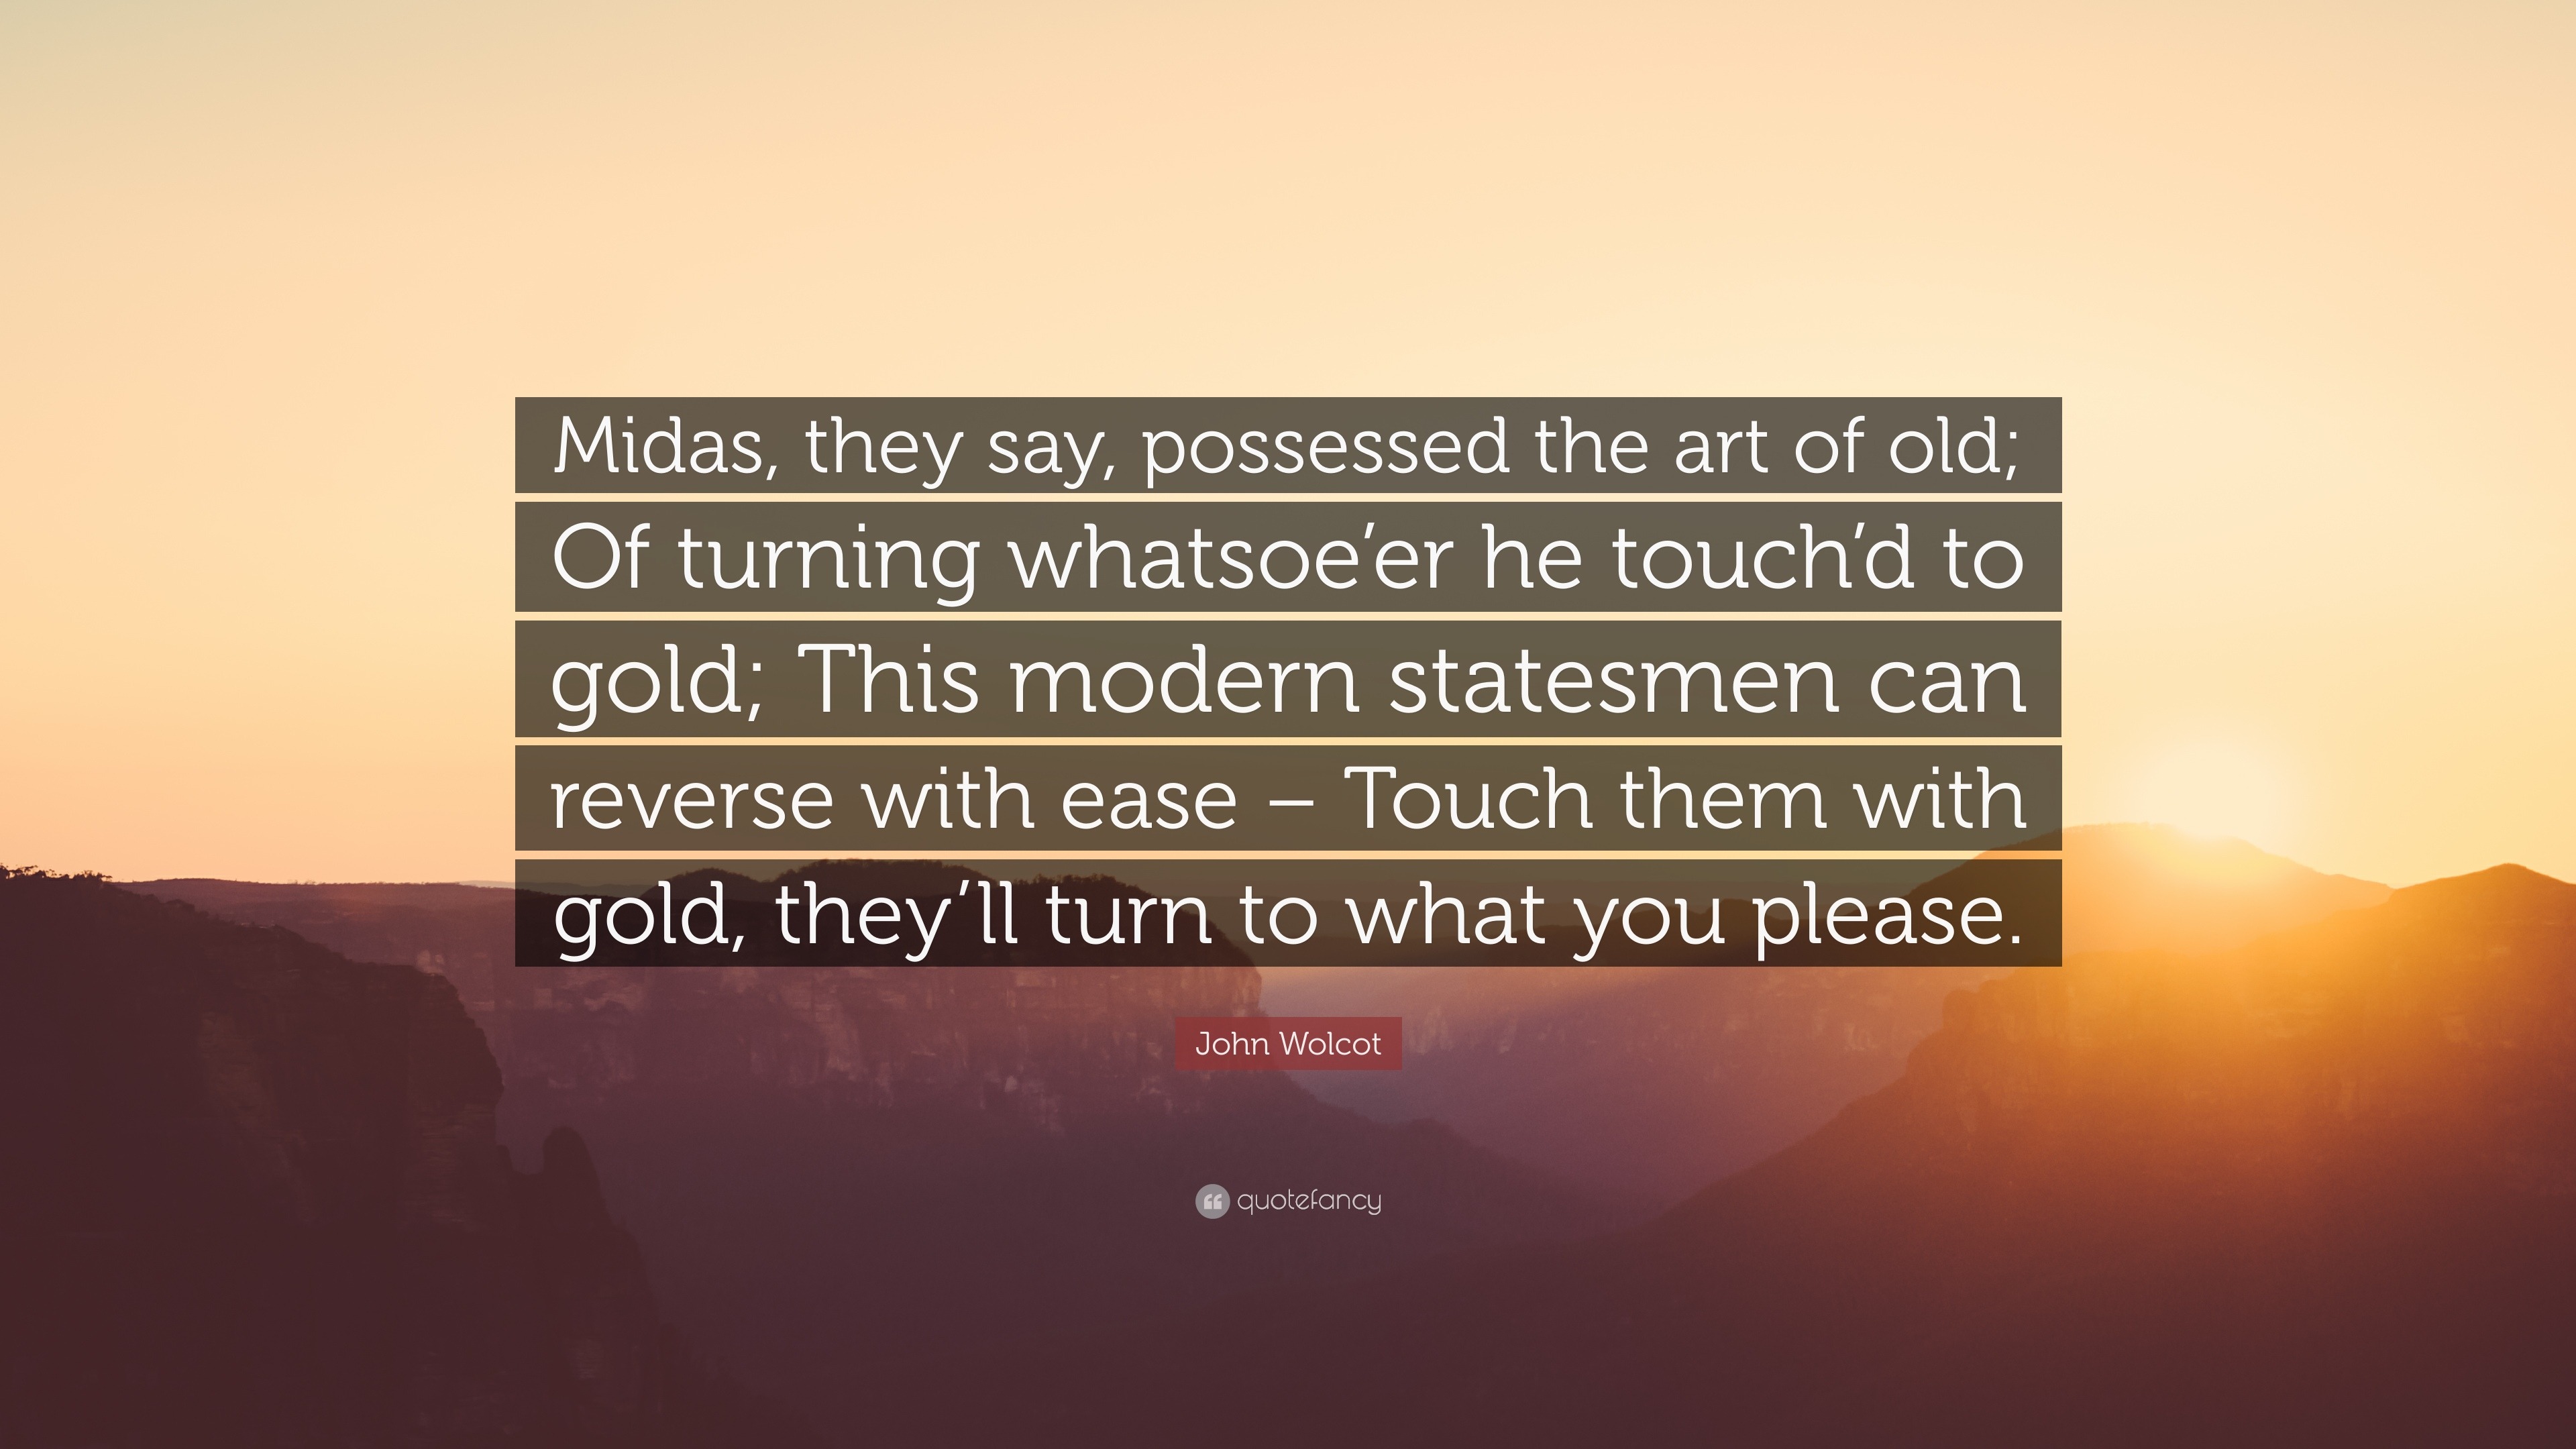 John Wolcot Quote: “Midas, they say, possessed the art of old; Of turning  whatsoe'er he touch'd to gold; This modern statesmen can reverse w”